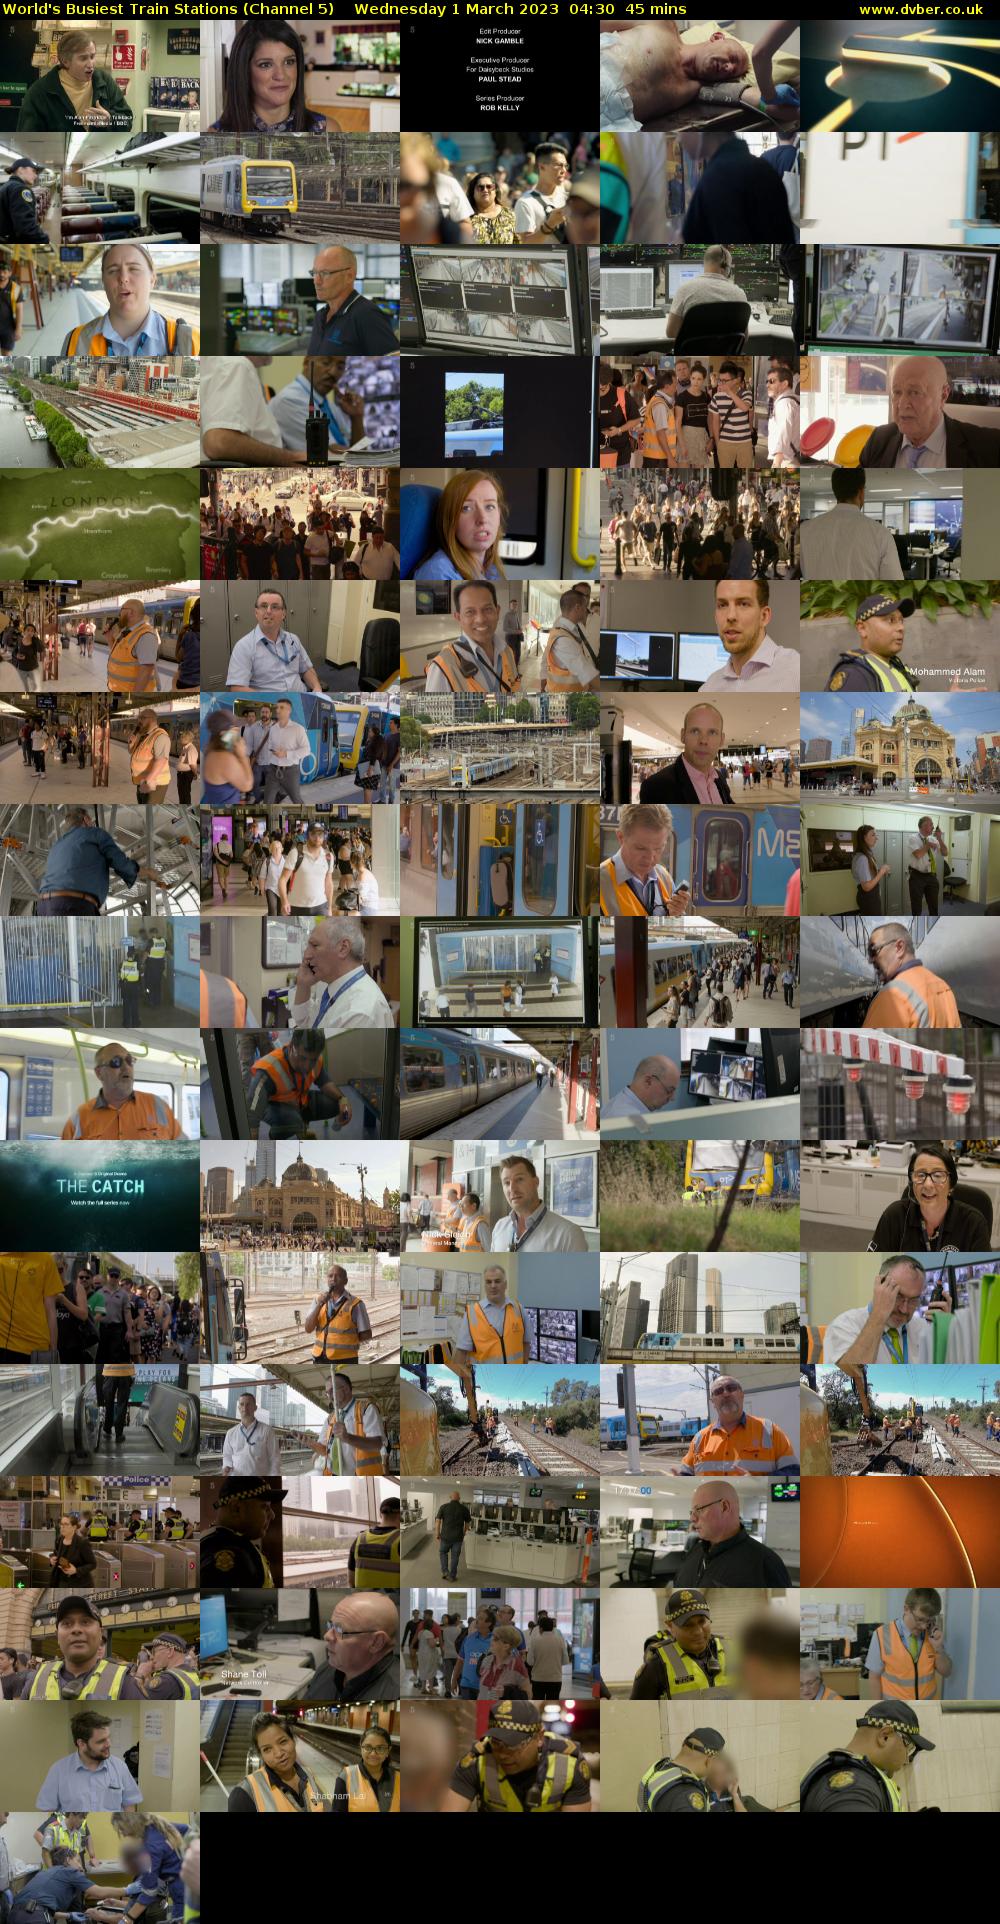 World's Busiest Train Stations (Channel 5) Wednesday 1 March 2023 04:30 - 05:15